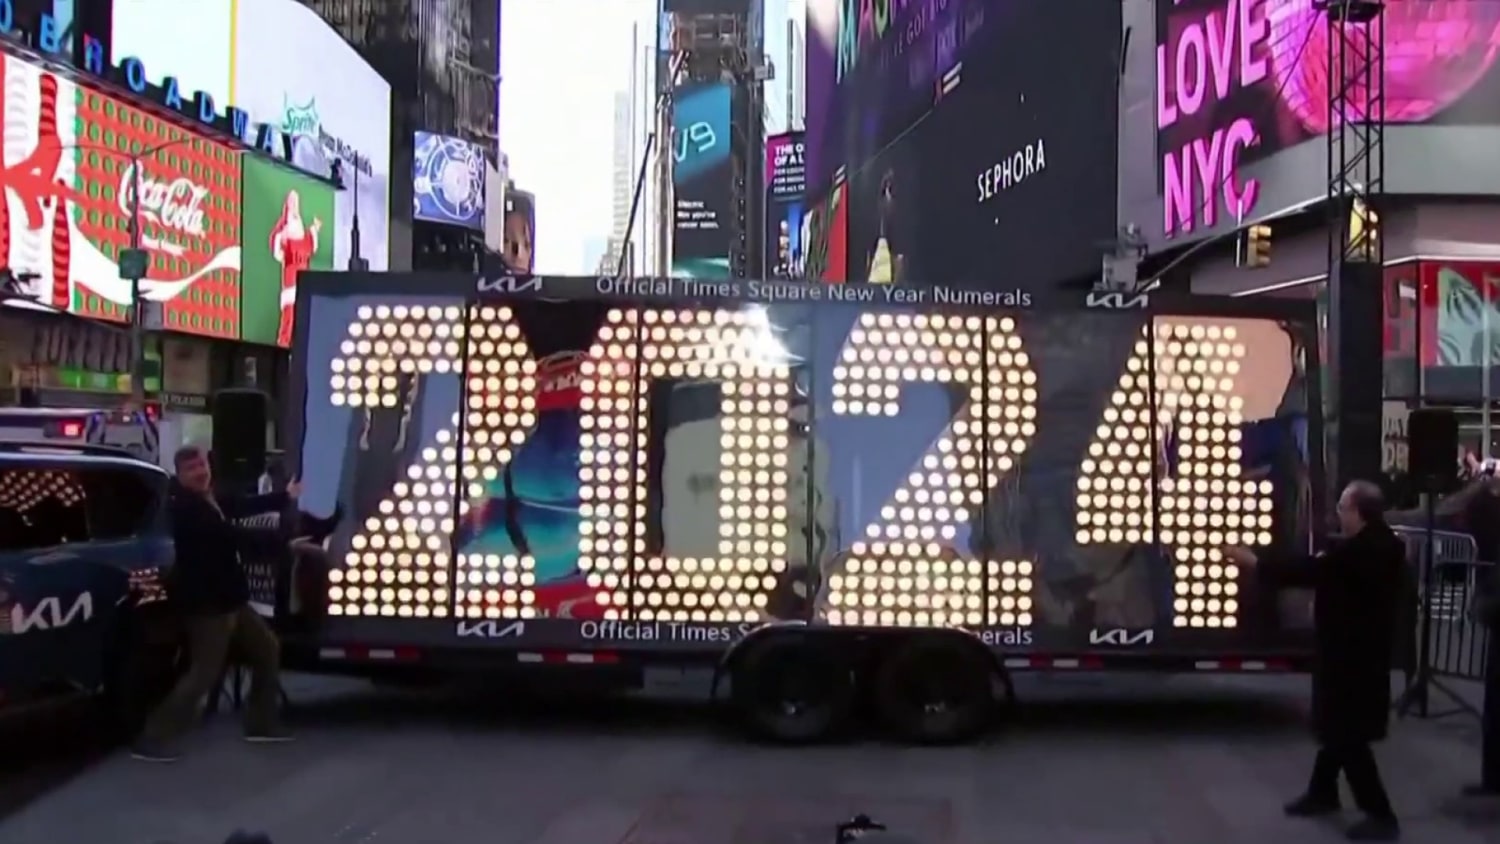 Tourists, New Yorkers flock to Times Square NYC Wishing Wall